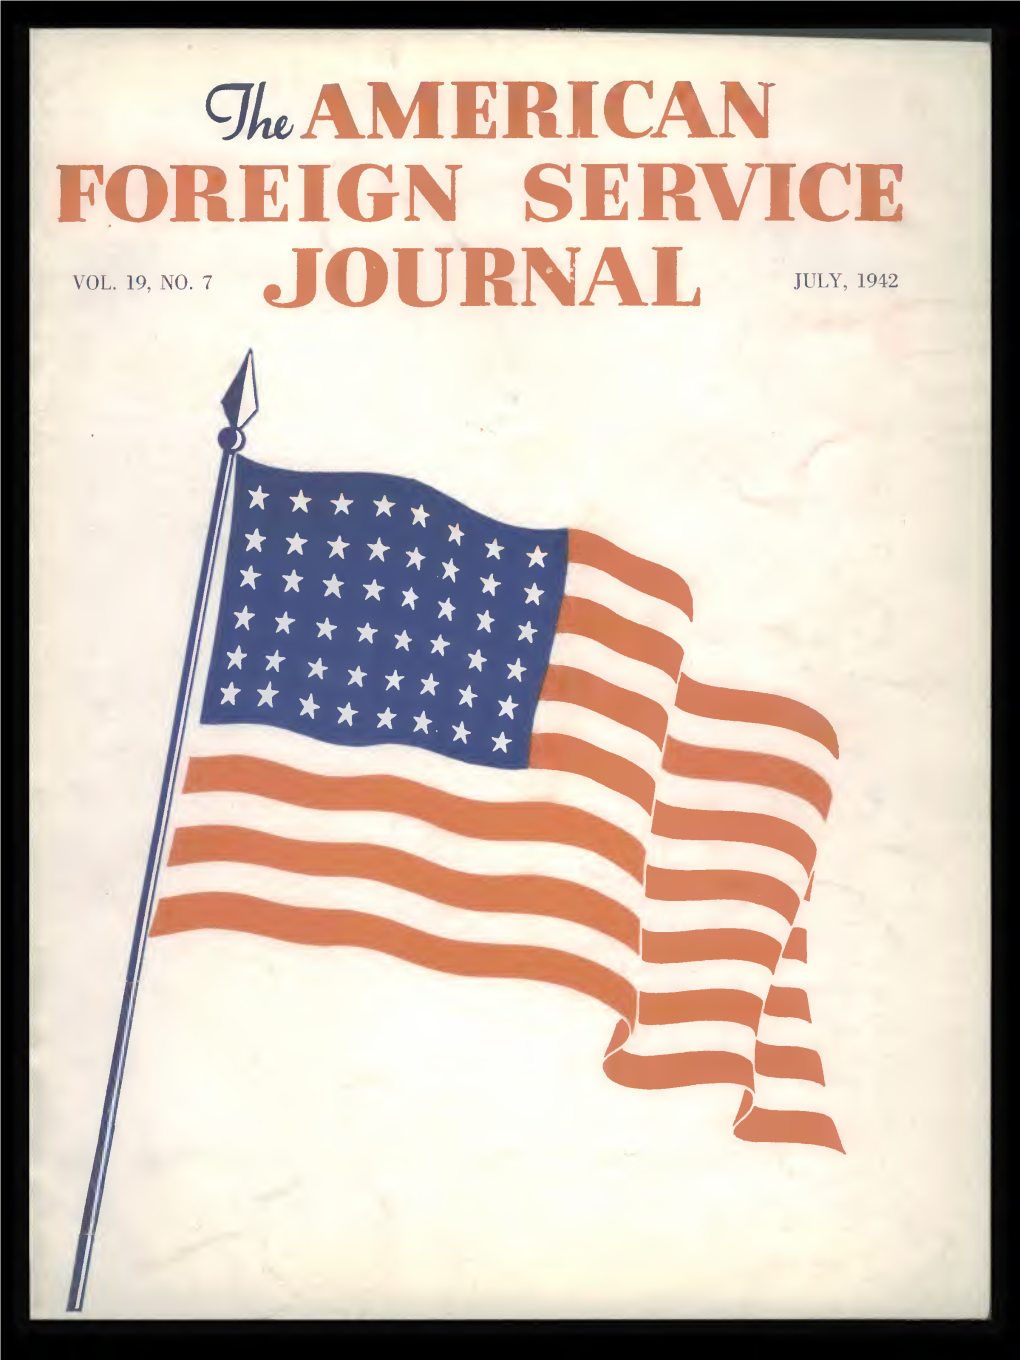 The Foreign Service Journal, July 1942